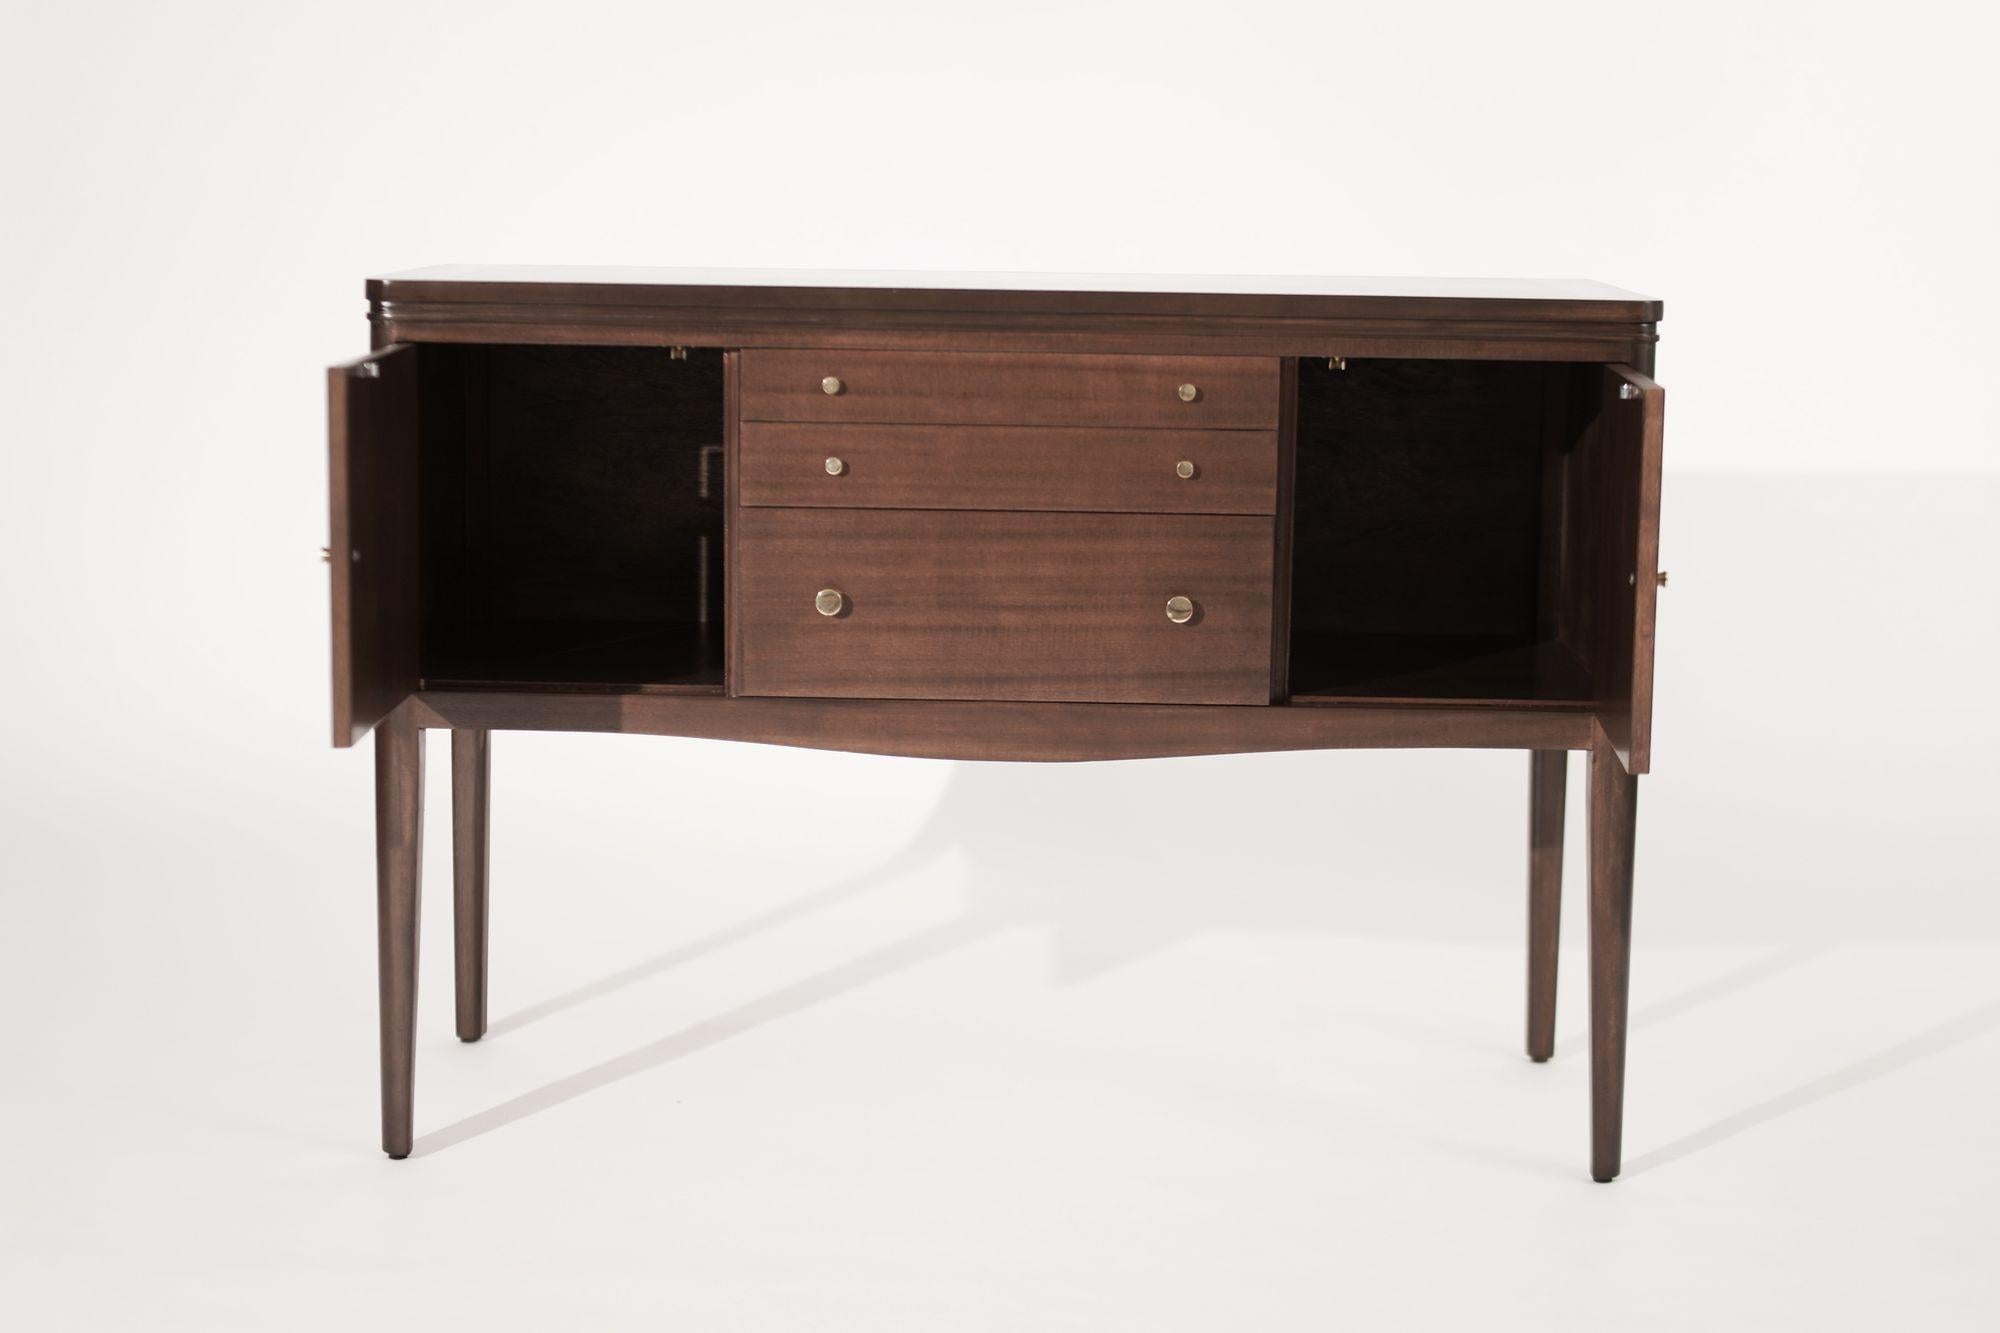 20th Century Mid Century Entry Console Table in Mahogany, C. 1950s For Sale